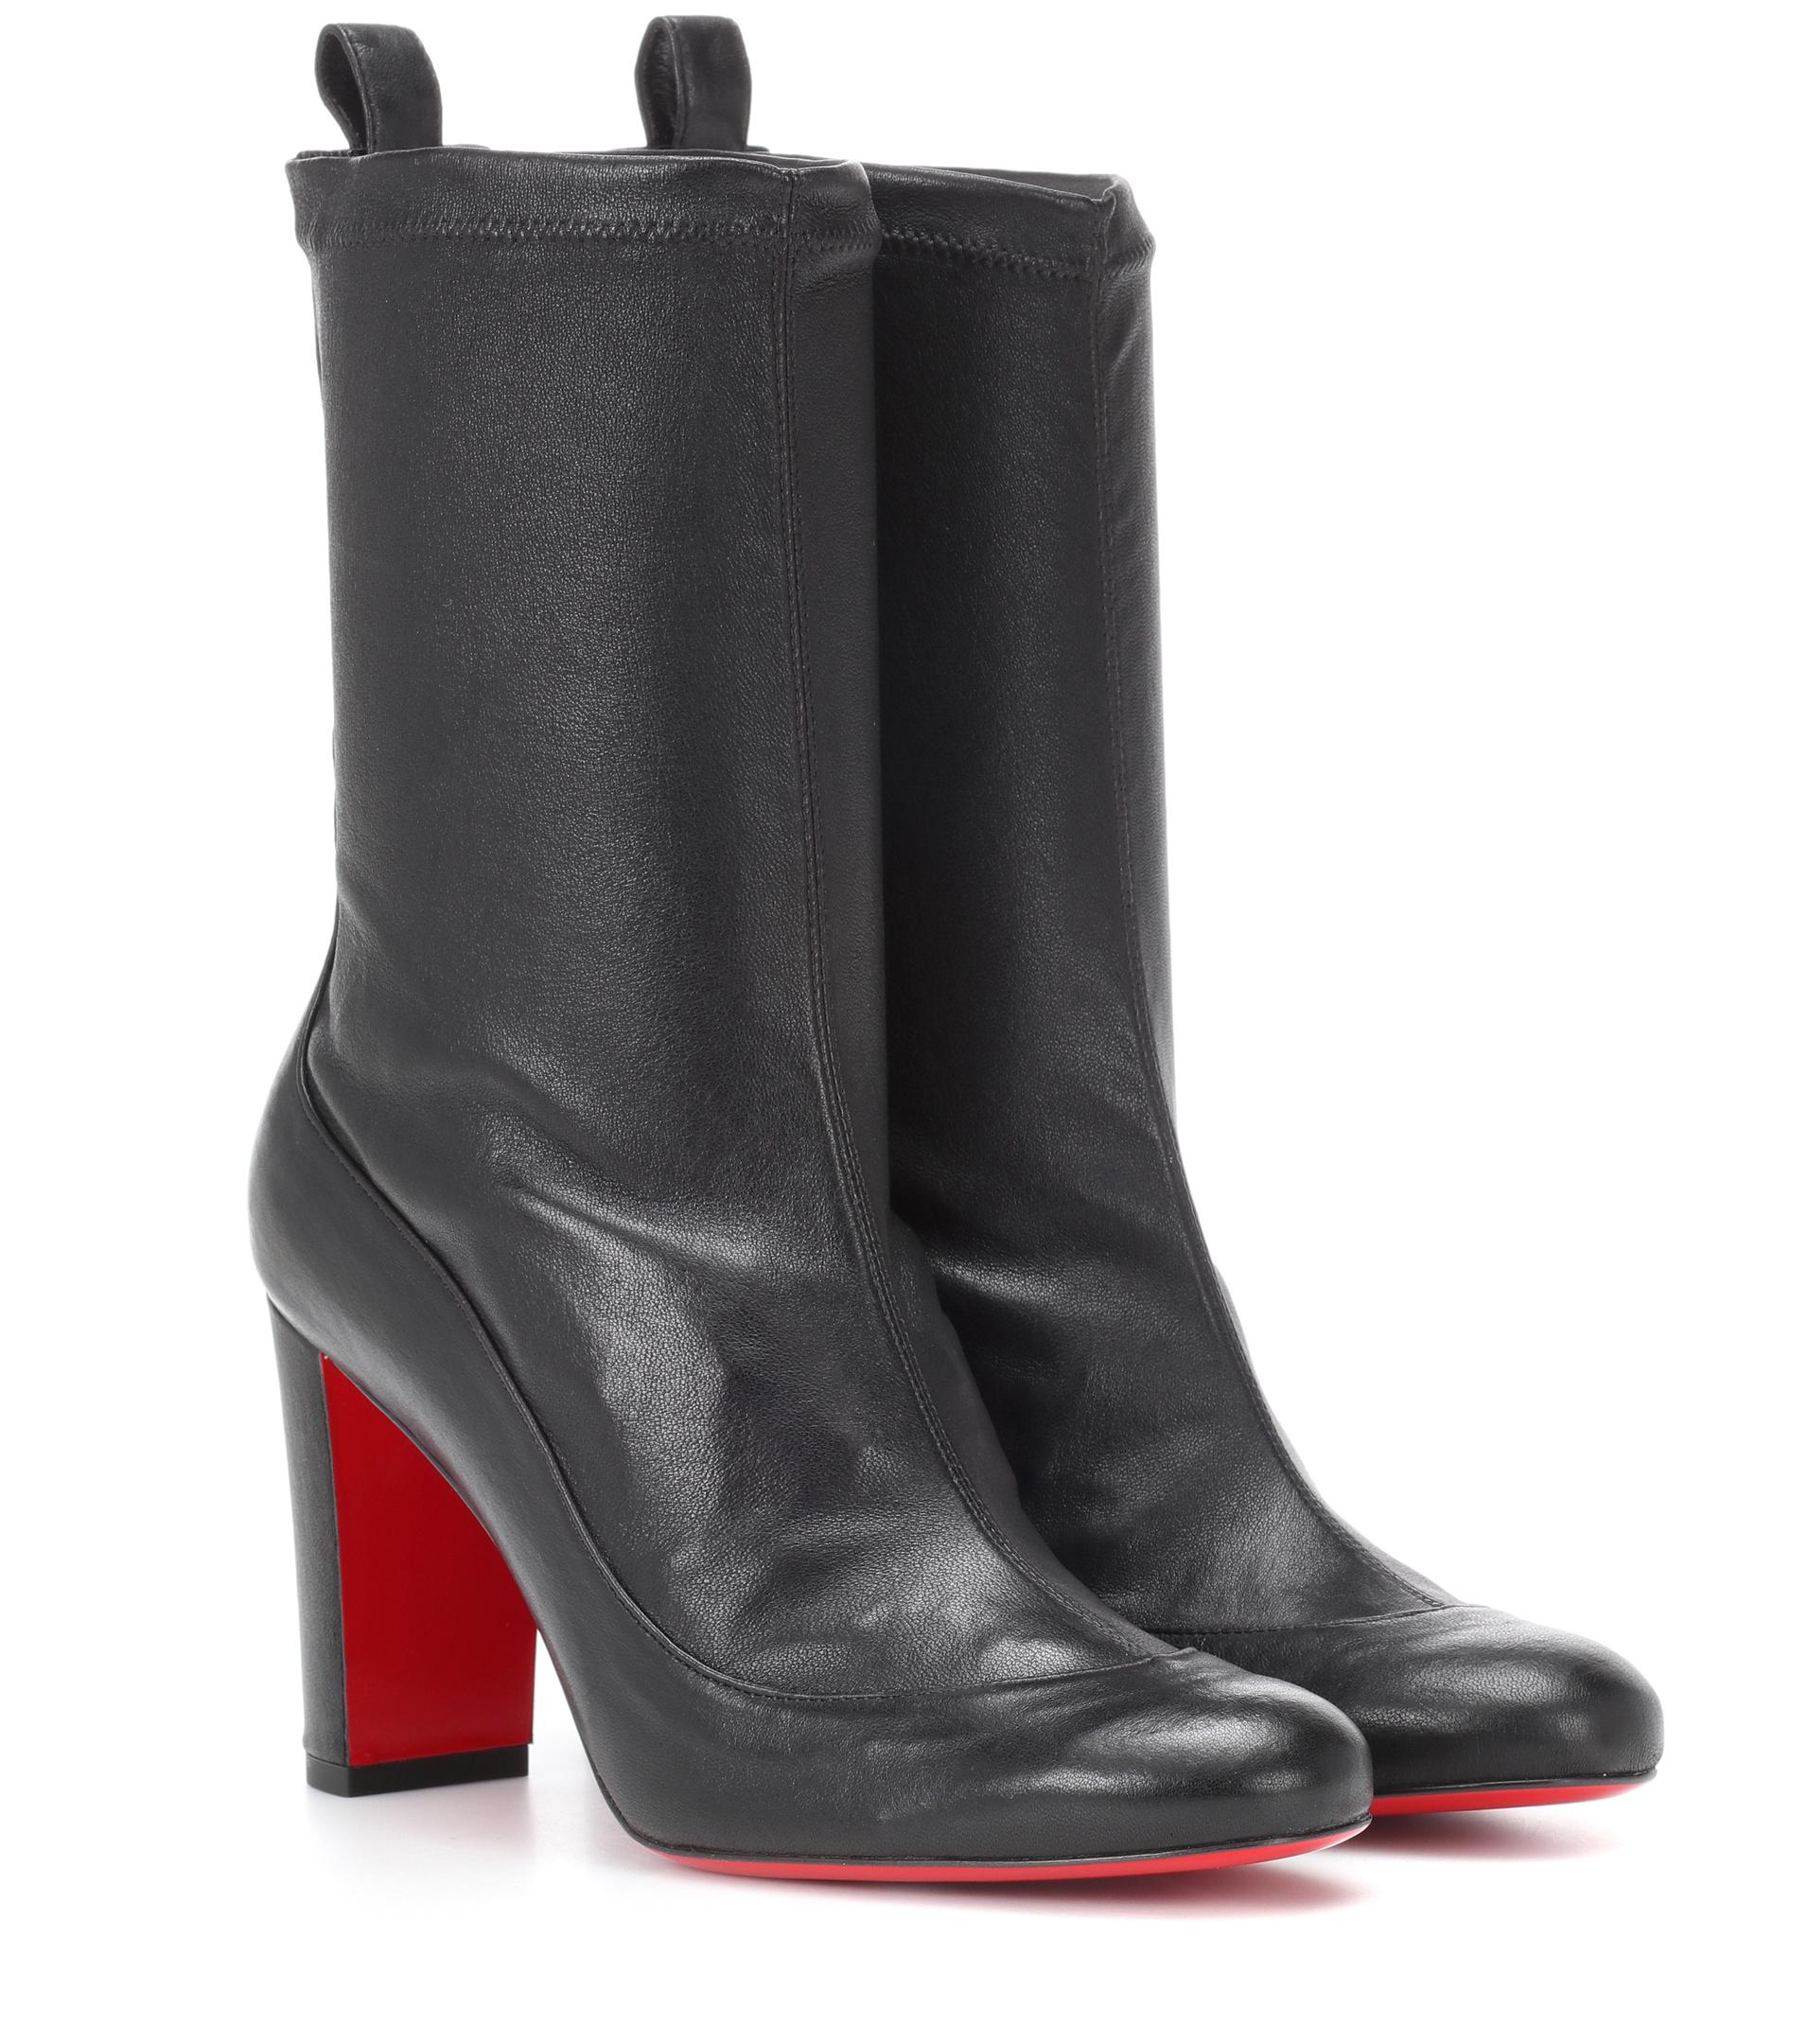 Christian Louboutin Gena Bootie 85 Leather Ankle Boots in Black - Lyst